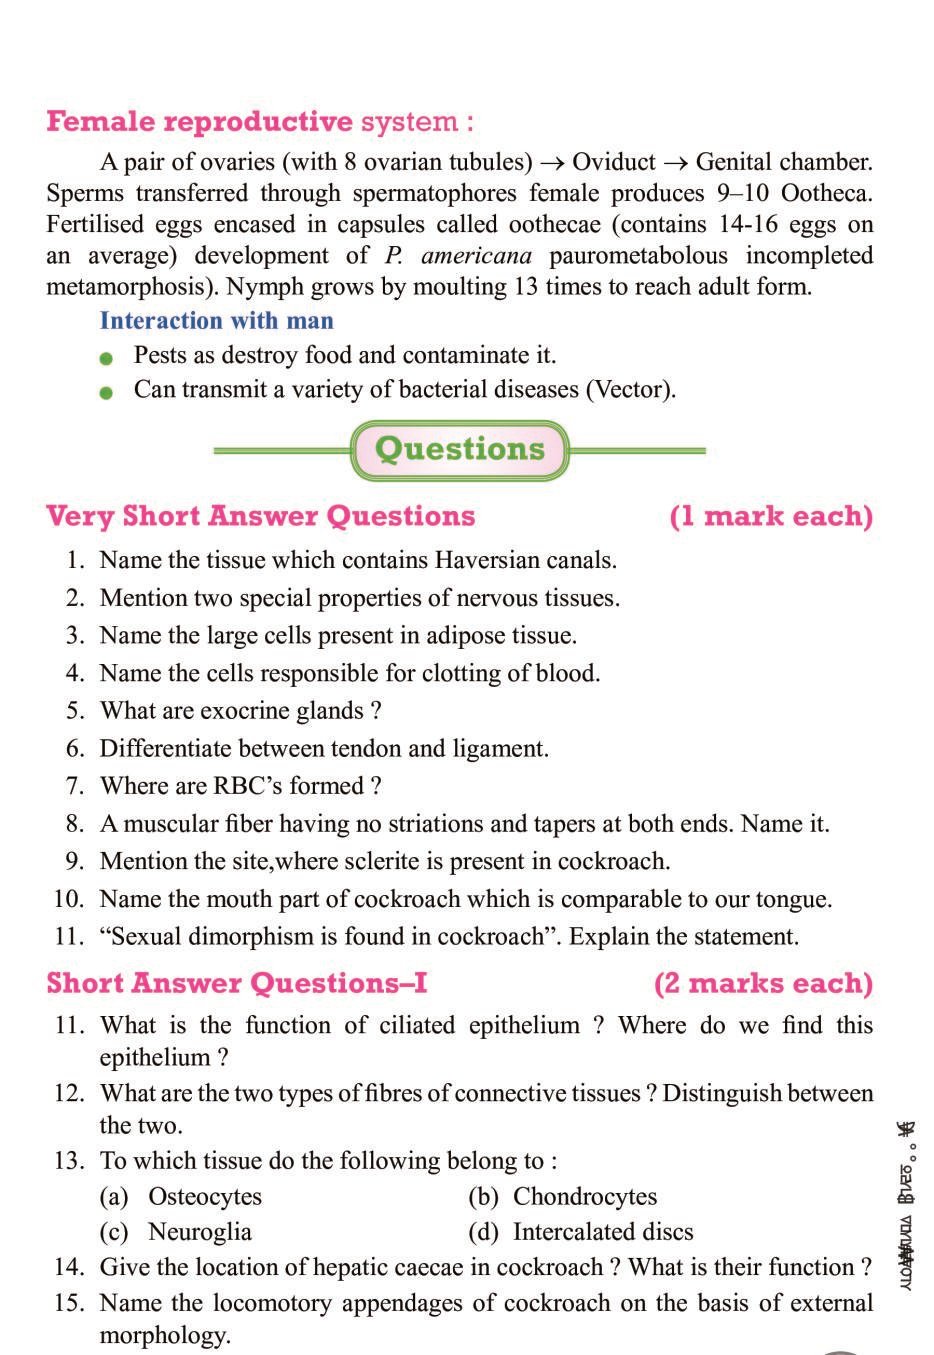 CBSE Notes Class 11 Biology Structural Organisation in Animal